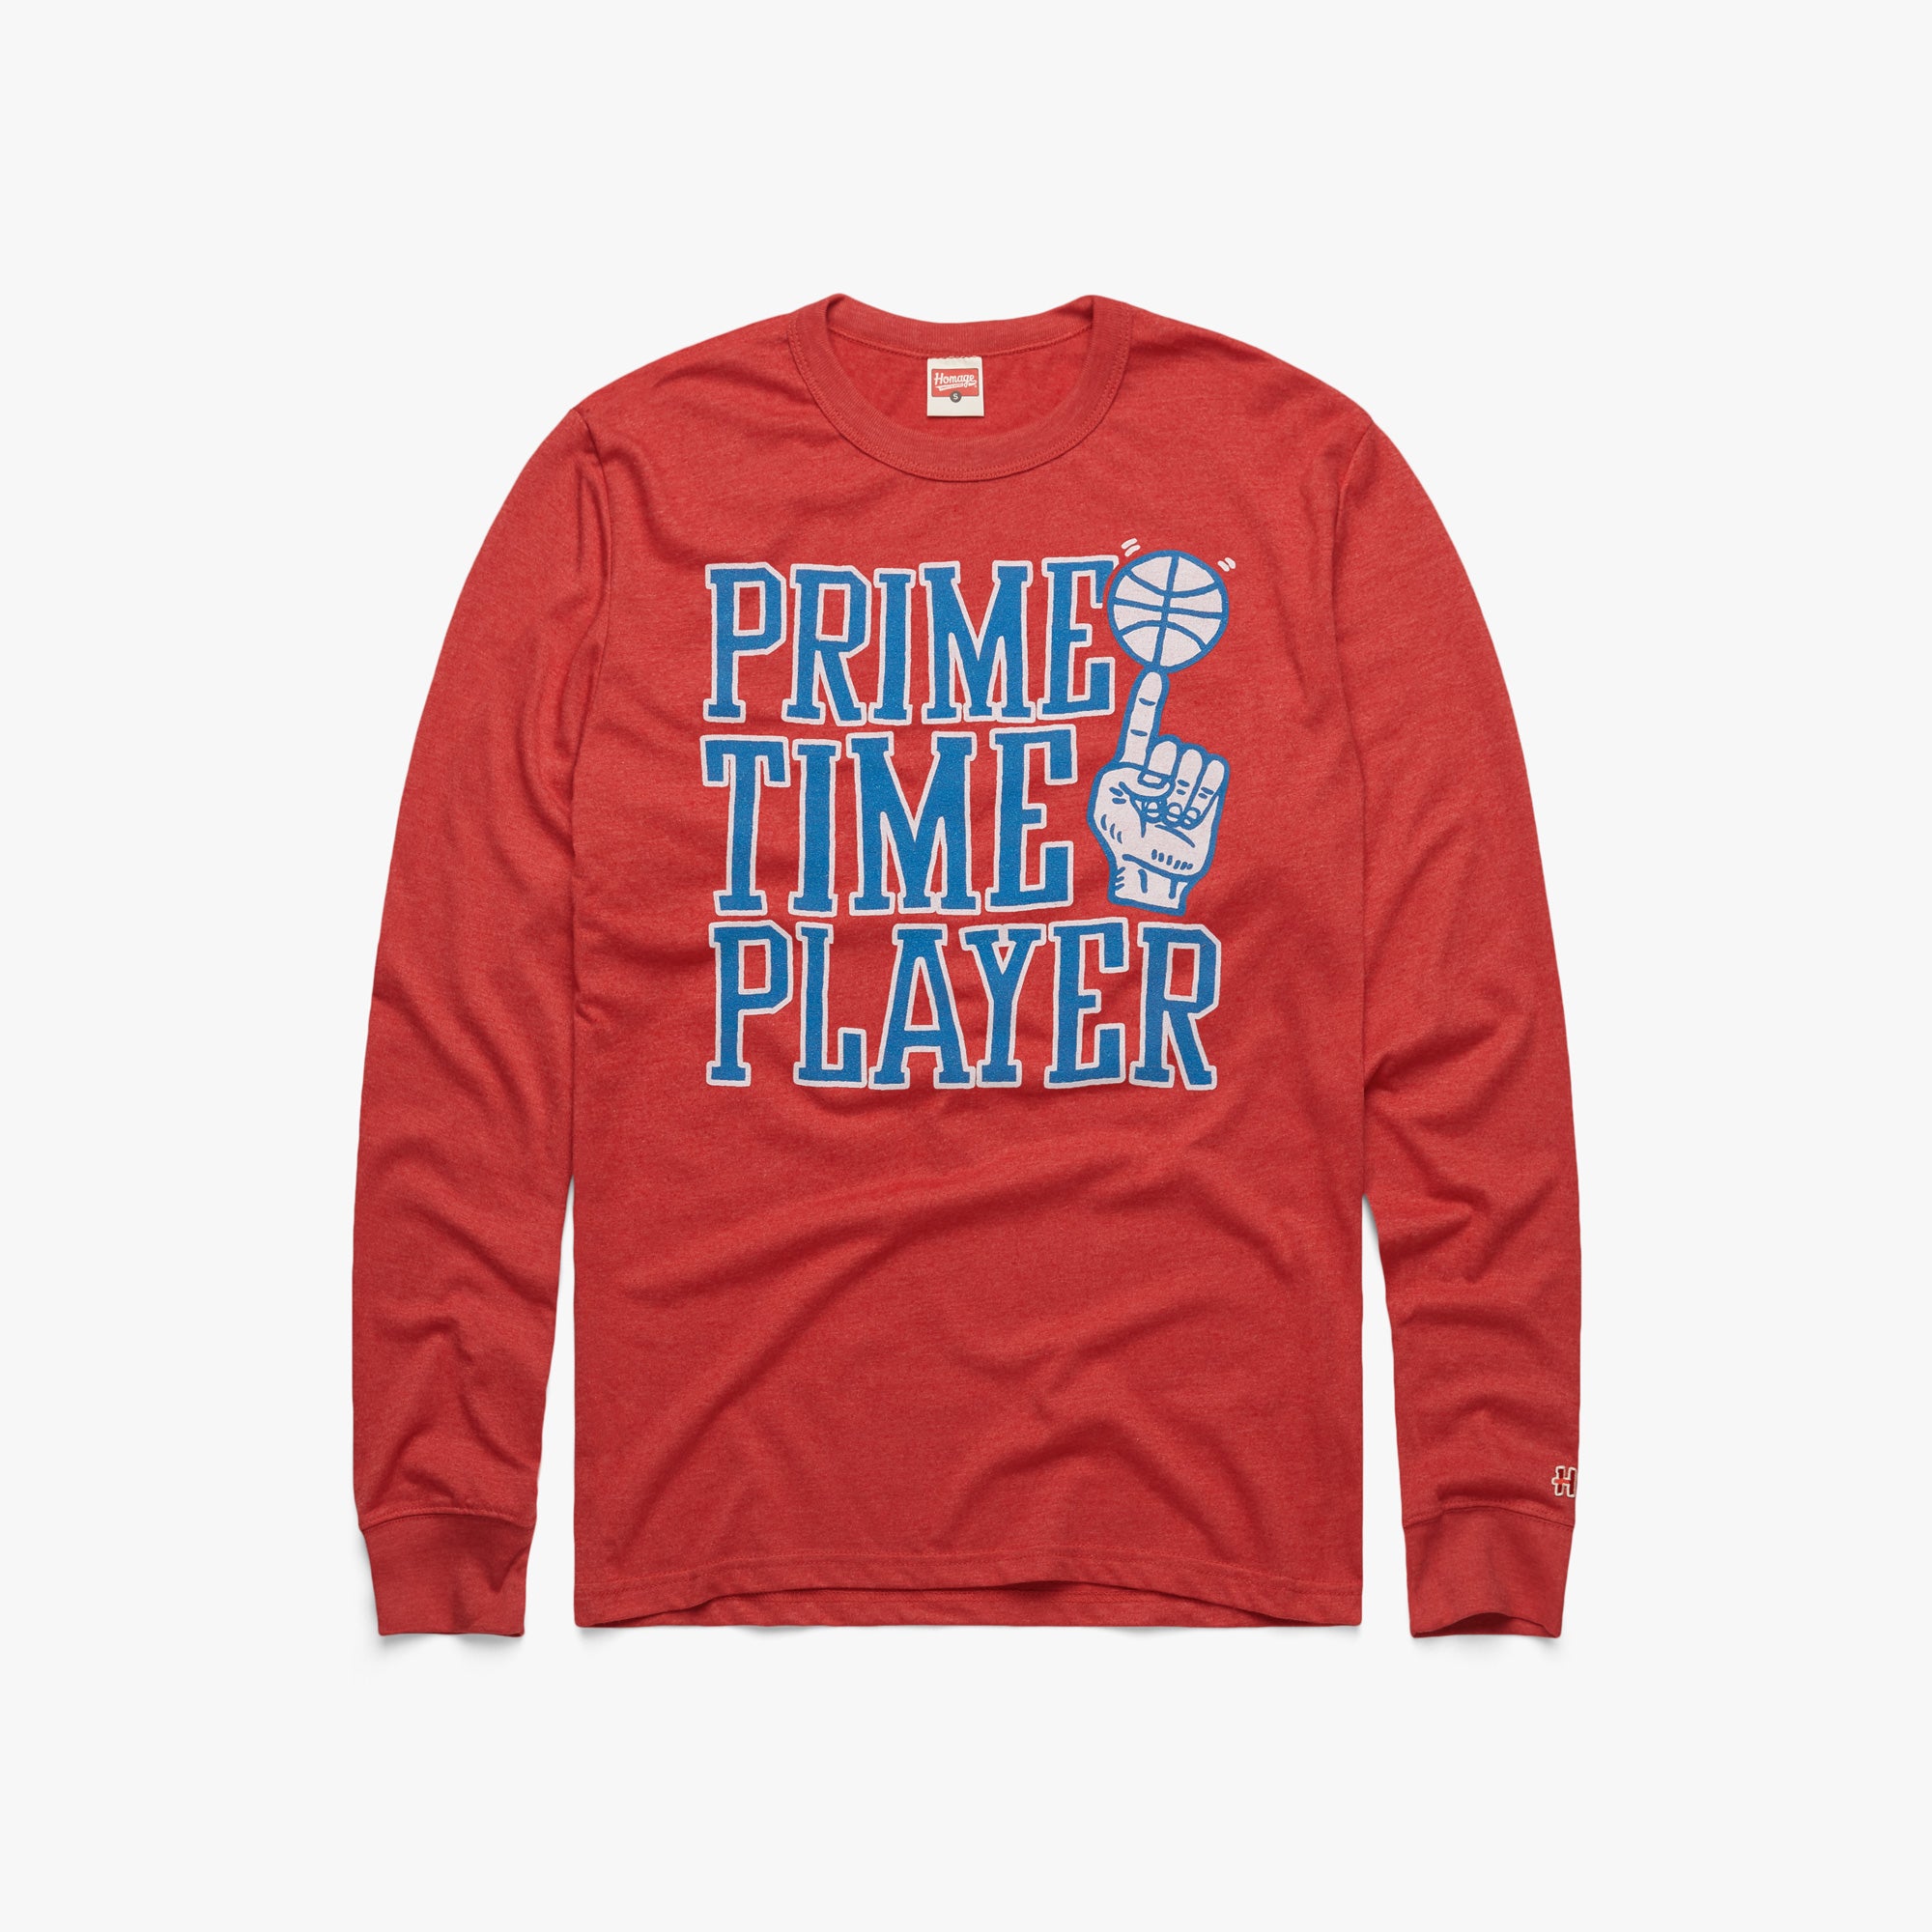 Prime Time Player Long Sleeve Tee